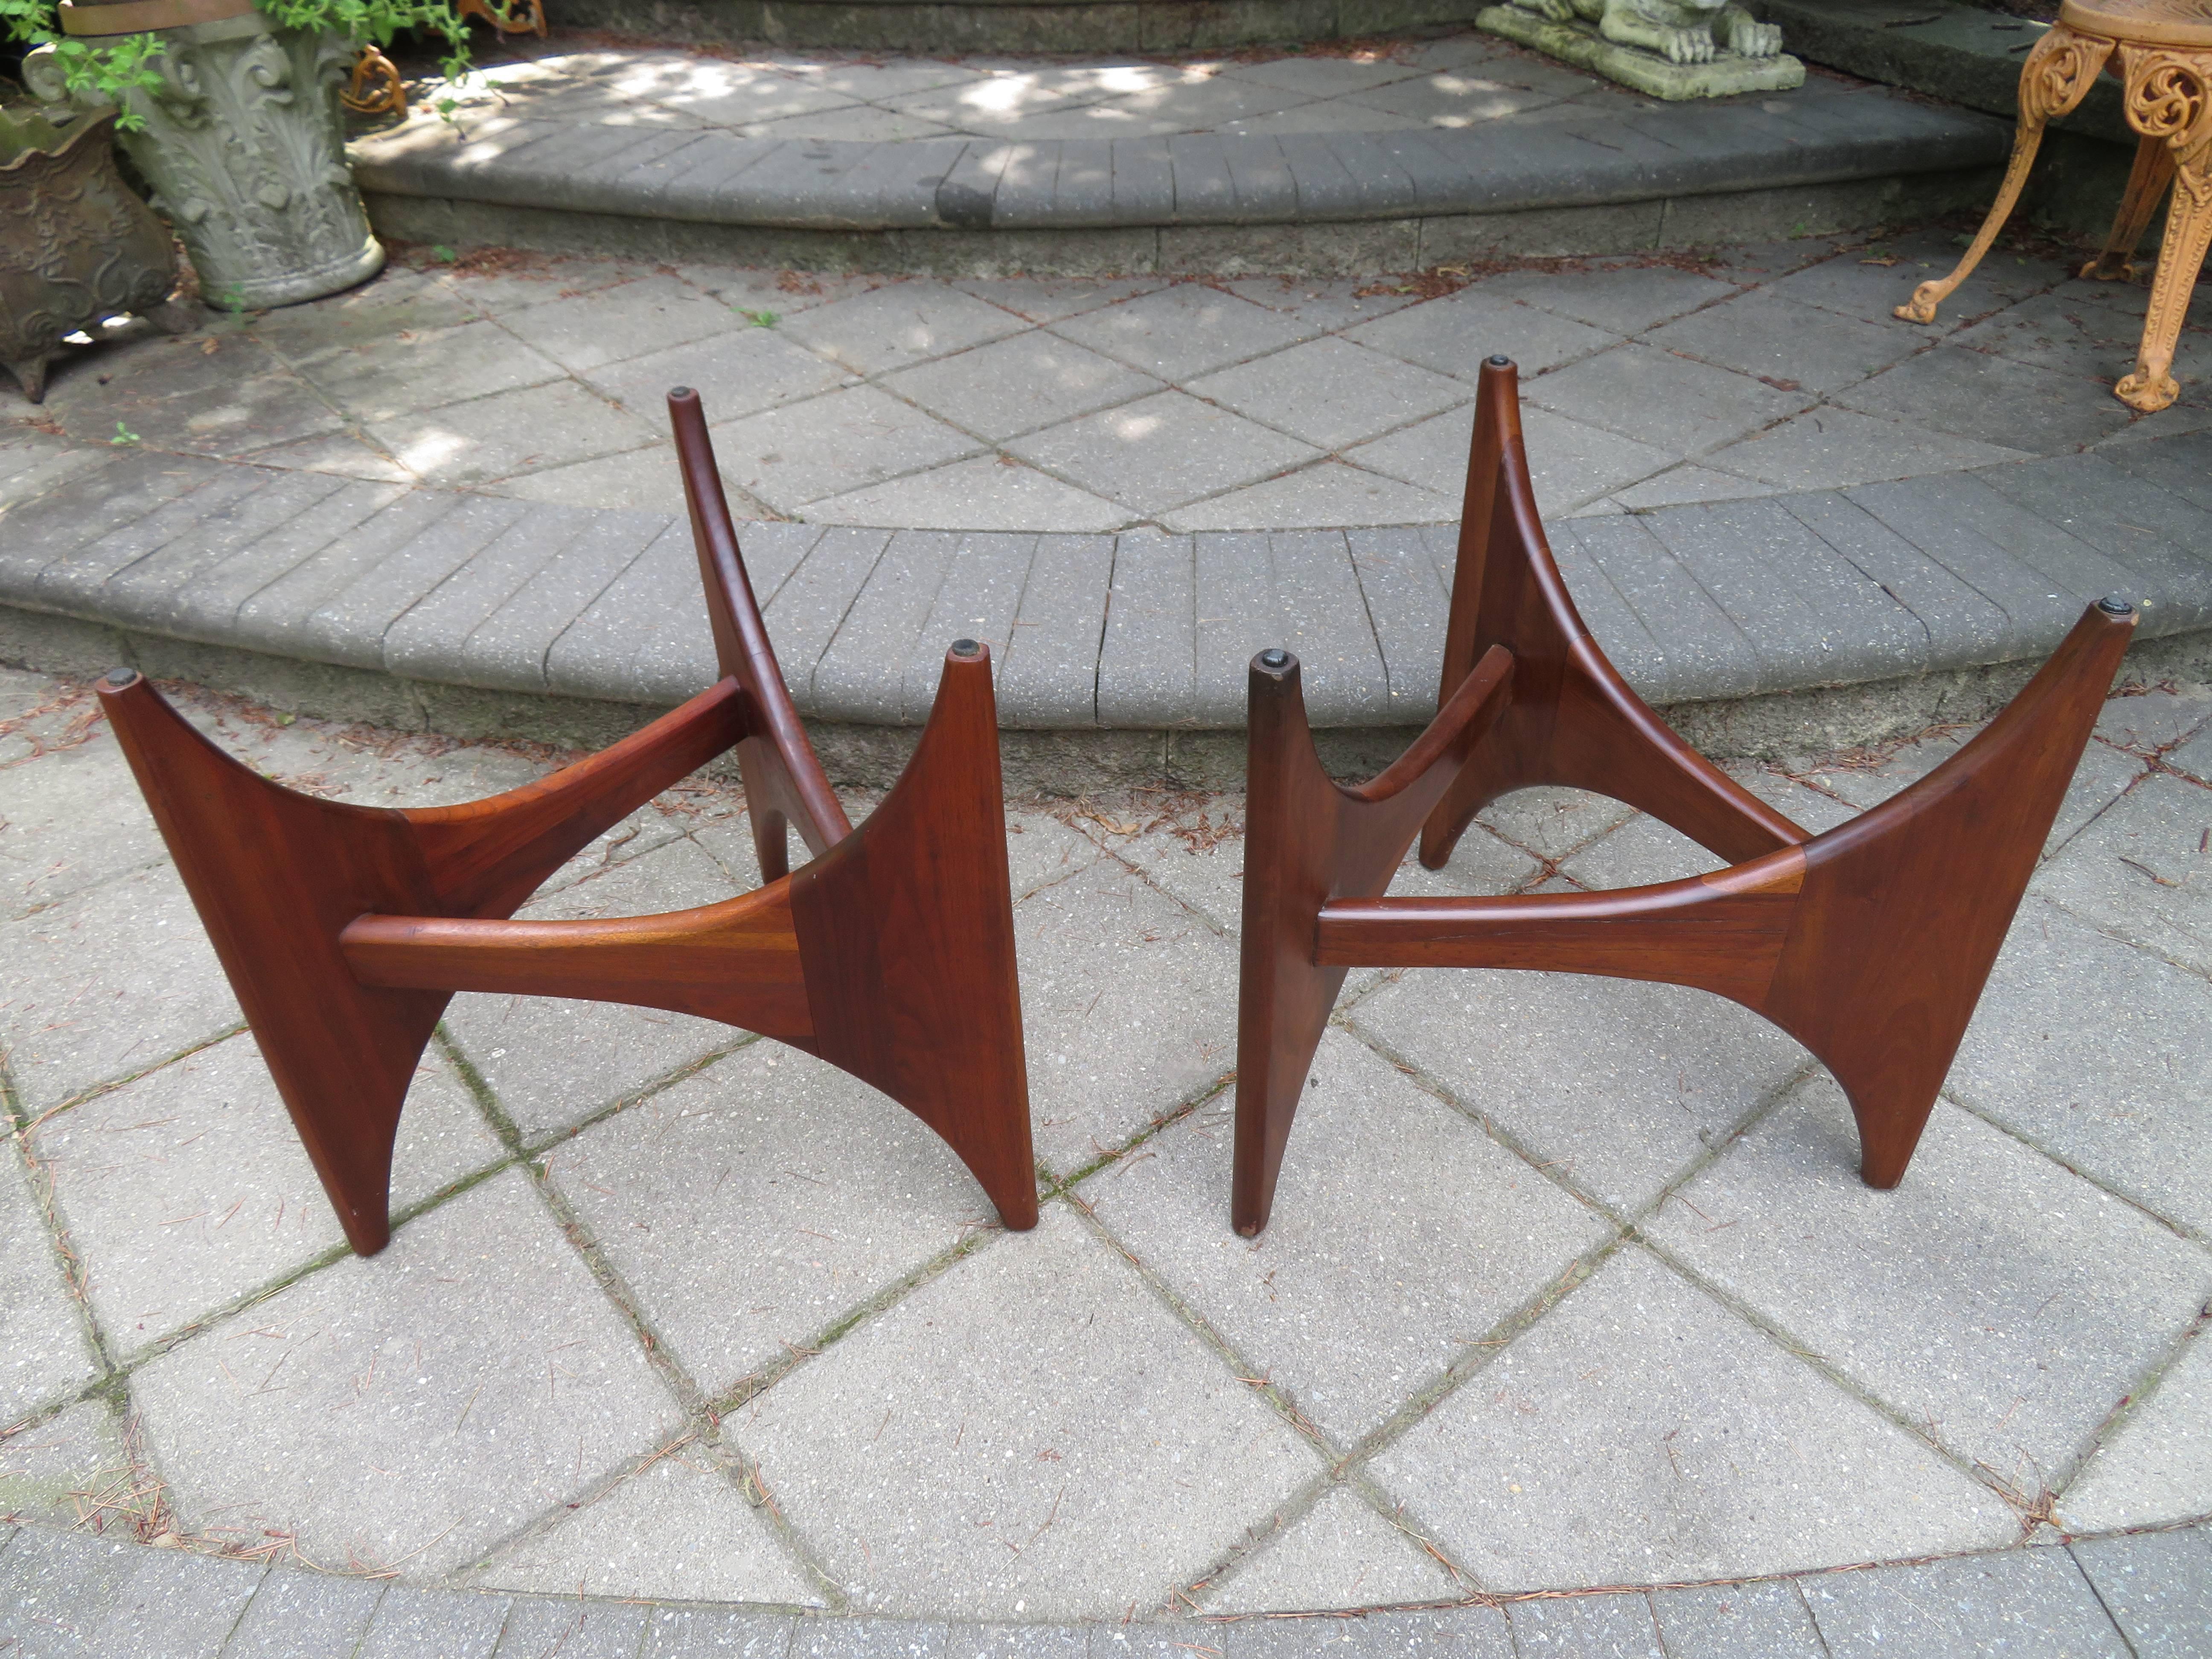 Gorgeous pair of Adrian Pearsall sculptural walnut triangular side tables. The glass tops can be either round or triangular and will be newly fabricated-the one pictured is the original. This table measurement is 19.5